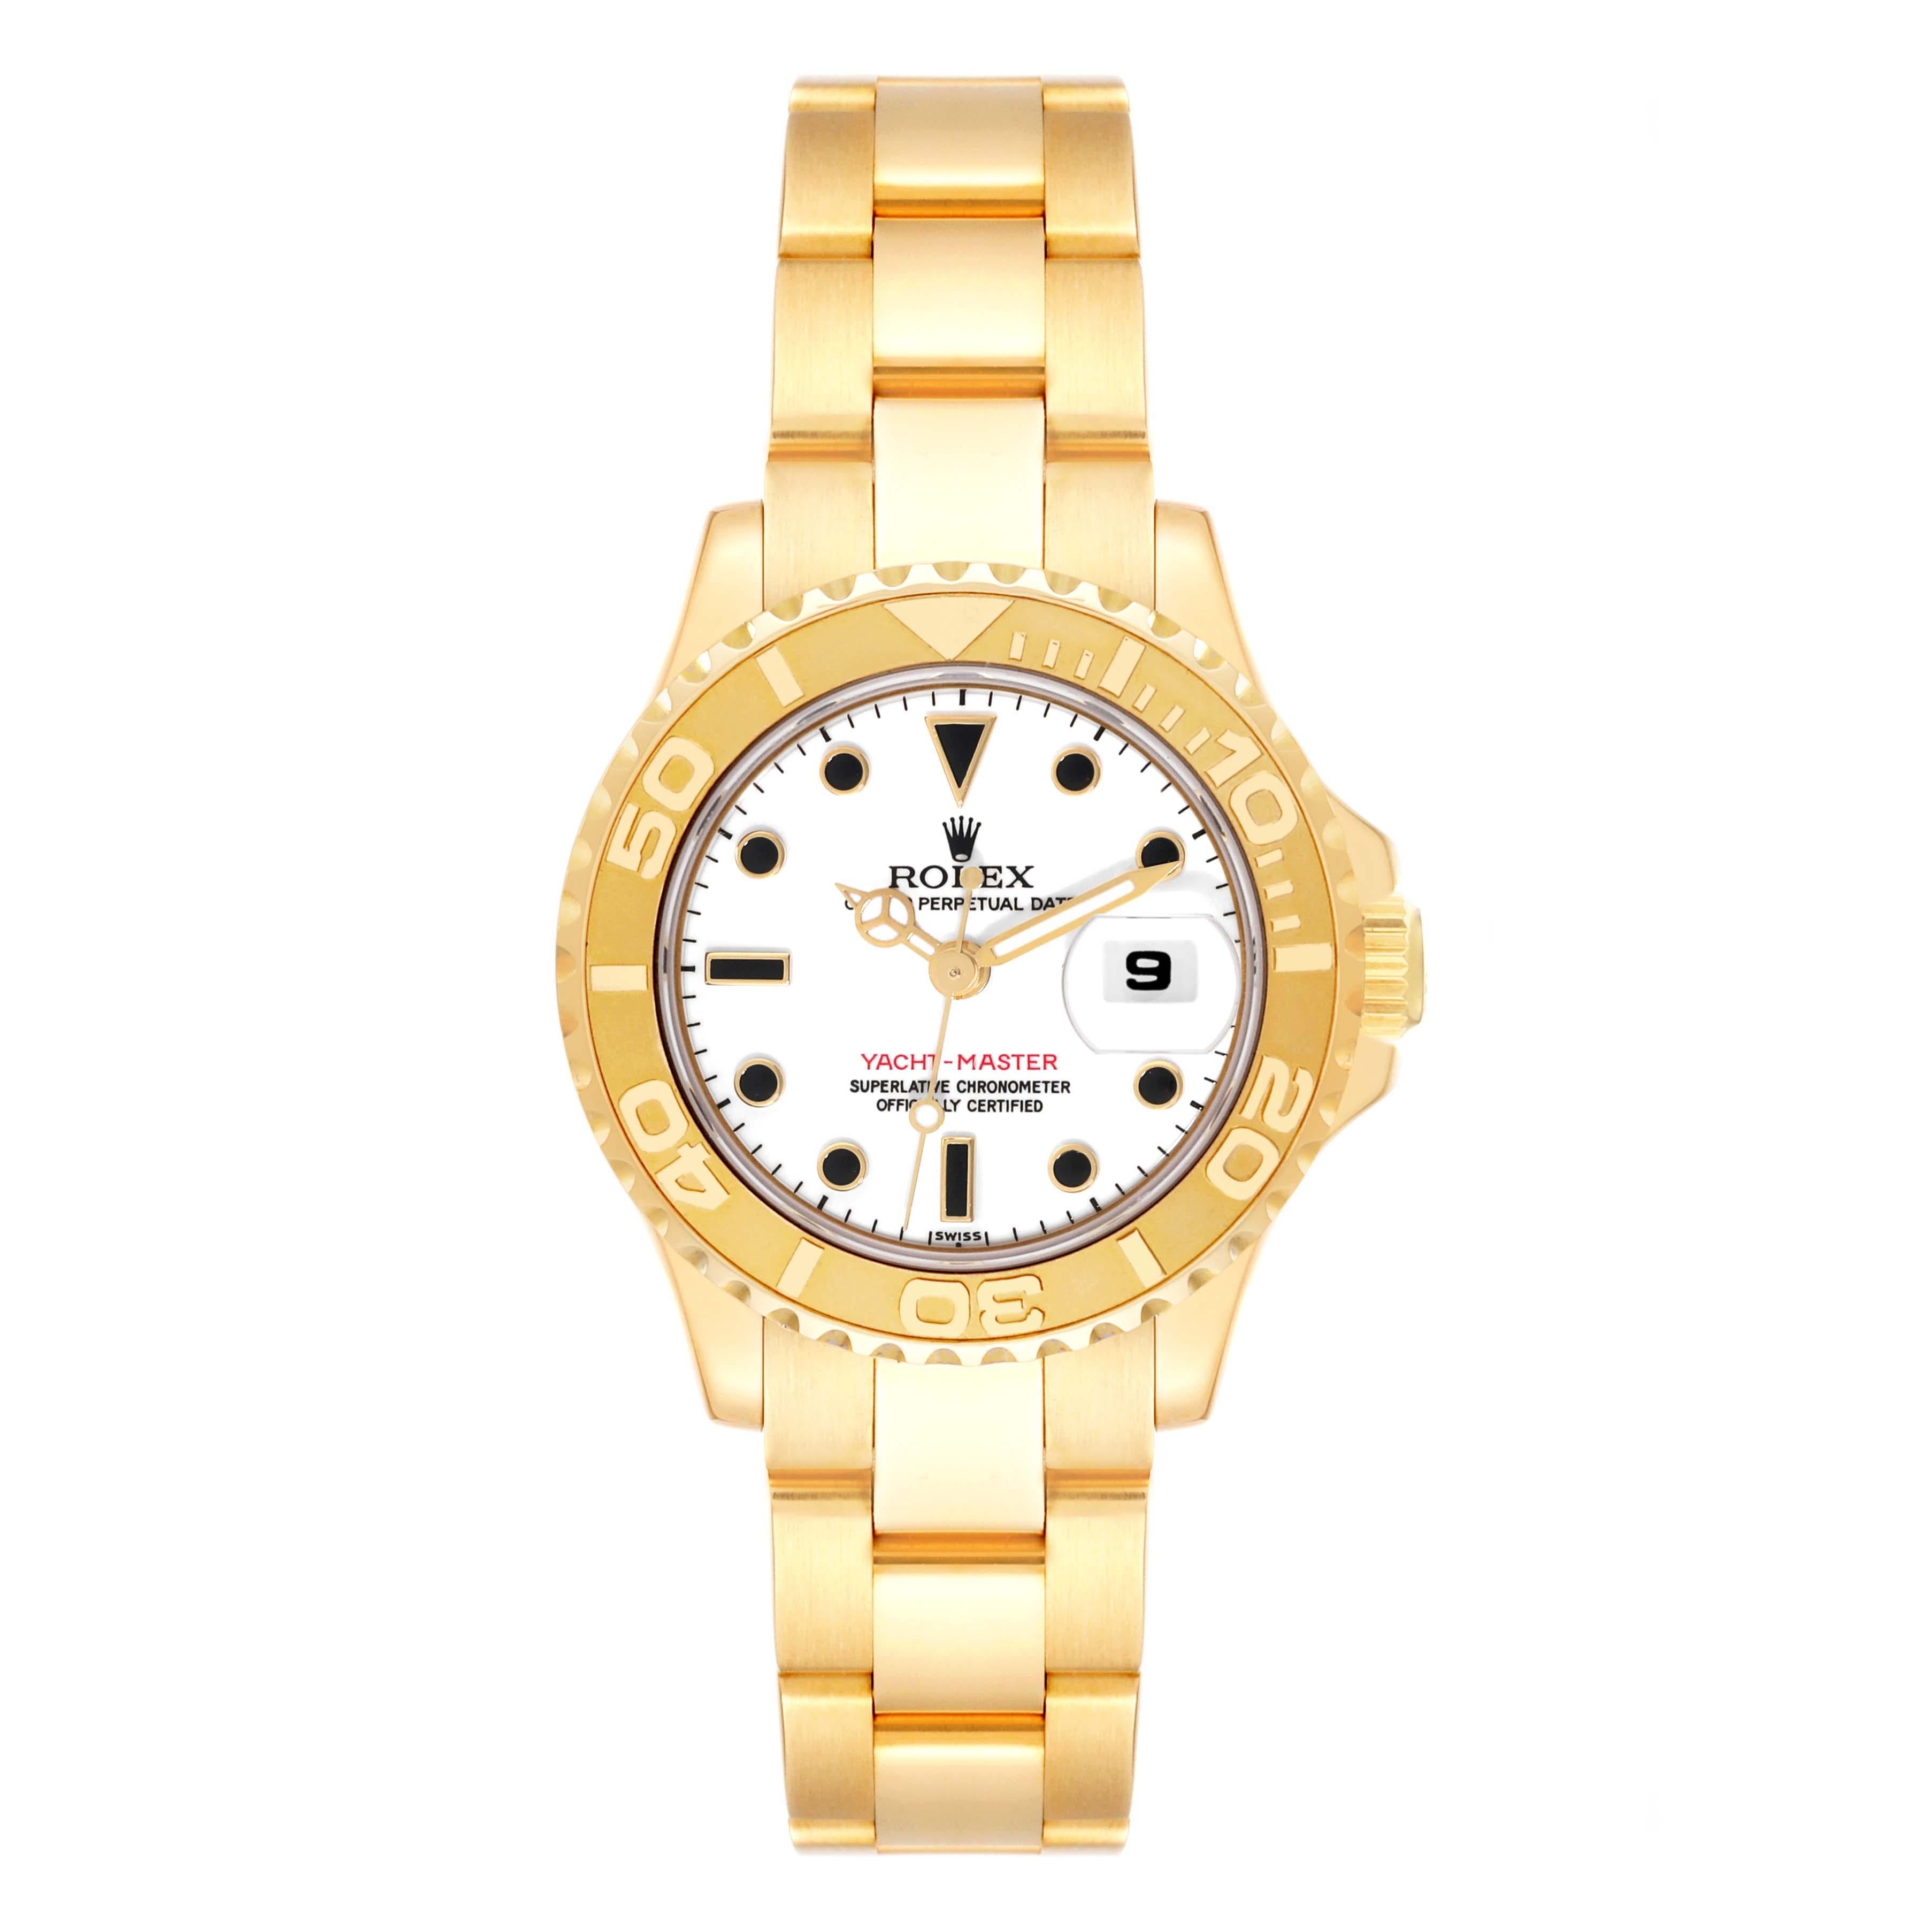 Rolex Yachtmaster 29 Yellow Gold White Dial Ladies Watch 69628. Officially certified chronometer automatic self-winding movement. 18K yellow gold case 29 mm in diameter. Rolex logo on the crown. 18K yellow gold special time-lapse bi-directional